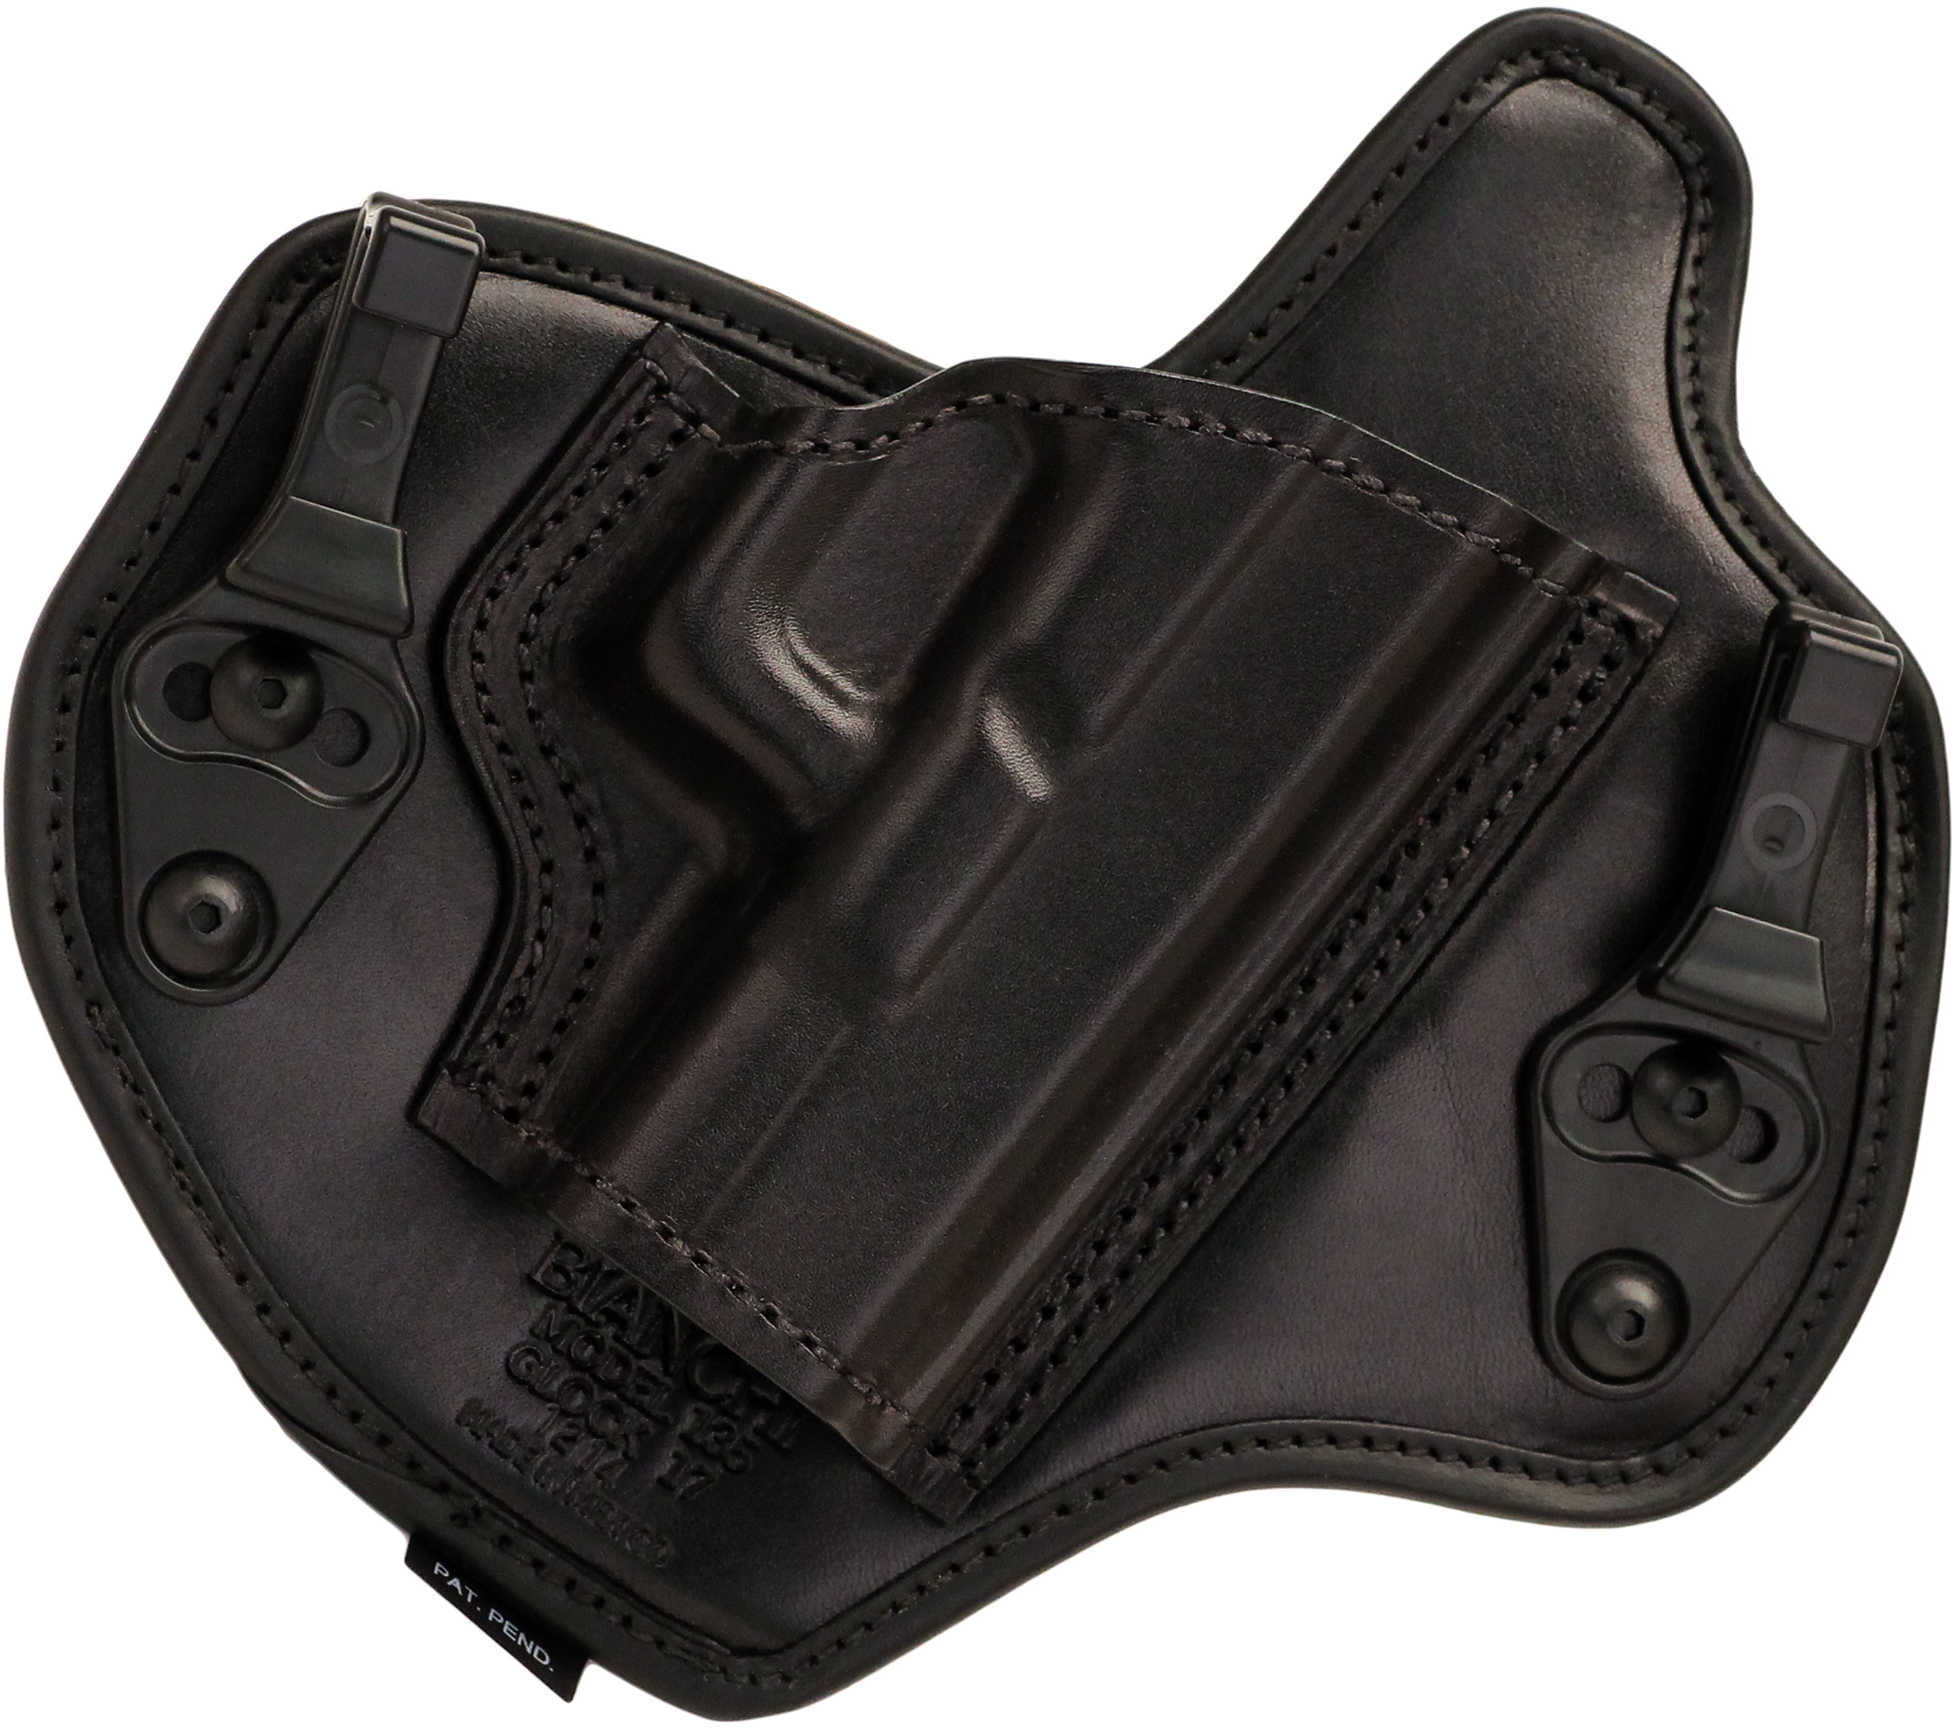 Bianchi 25744 Suppression IWB for Glock 17 Leather/Thermoplastic Black